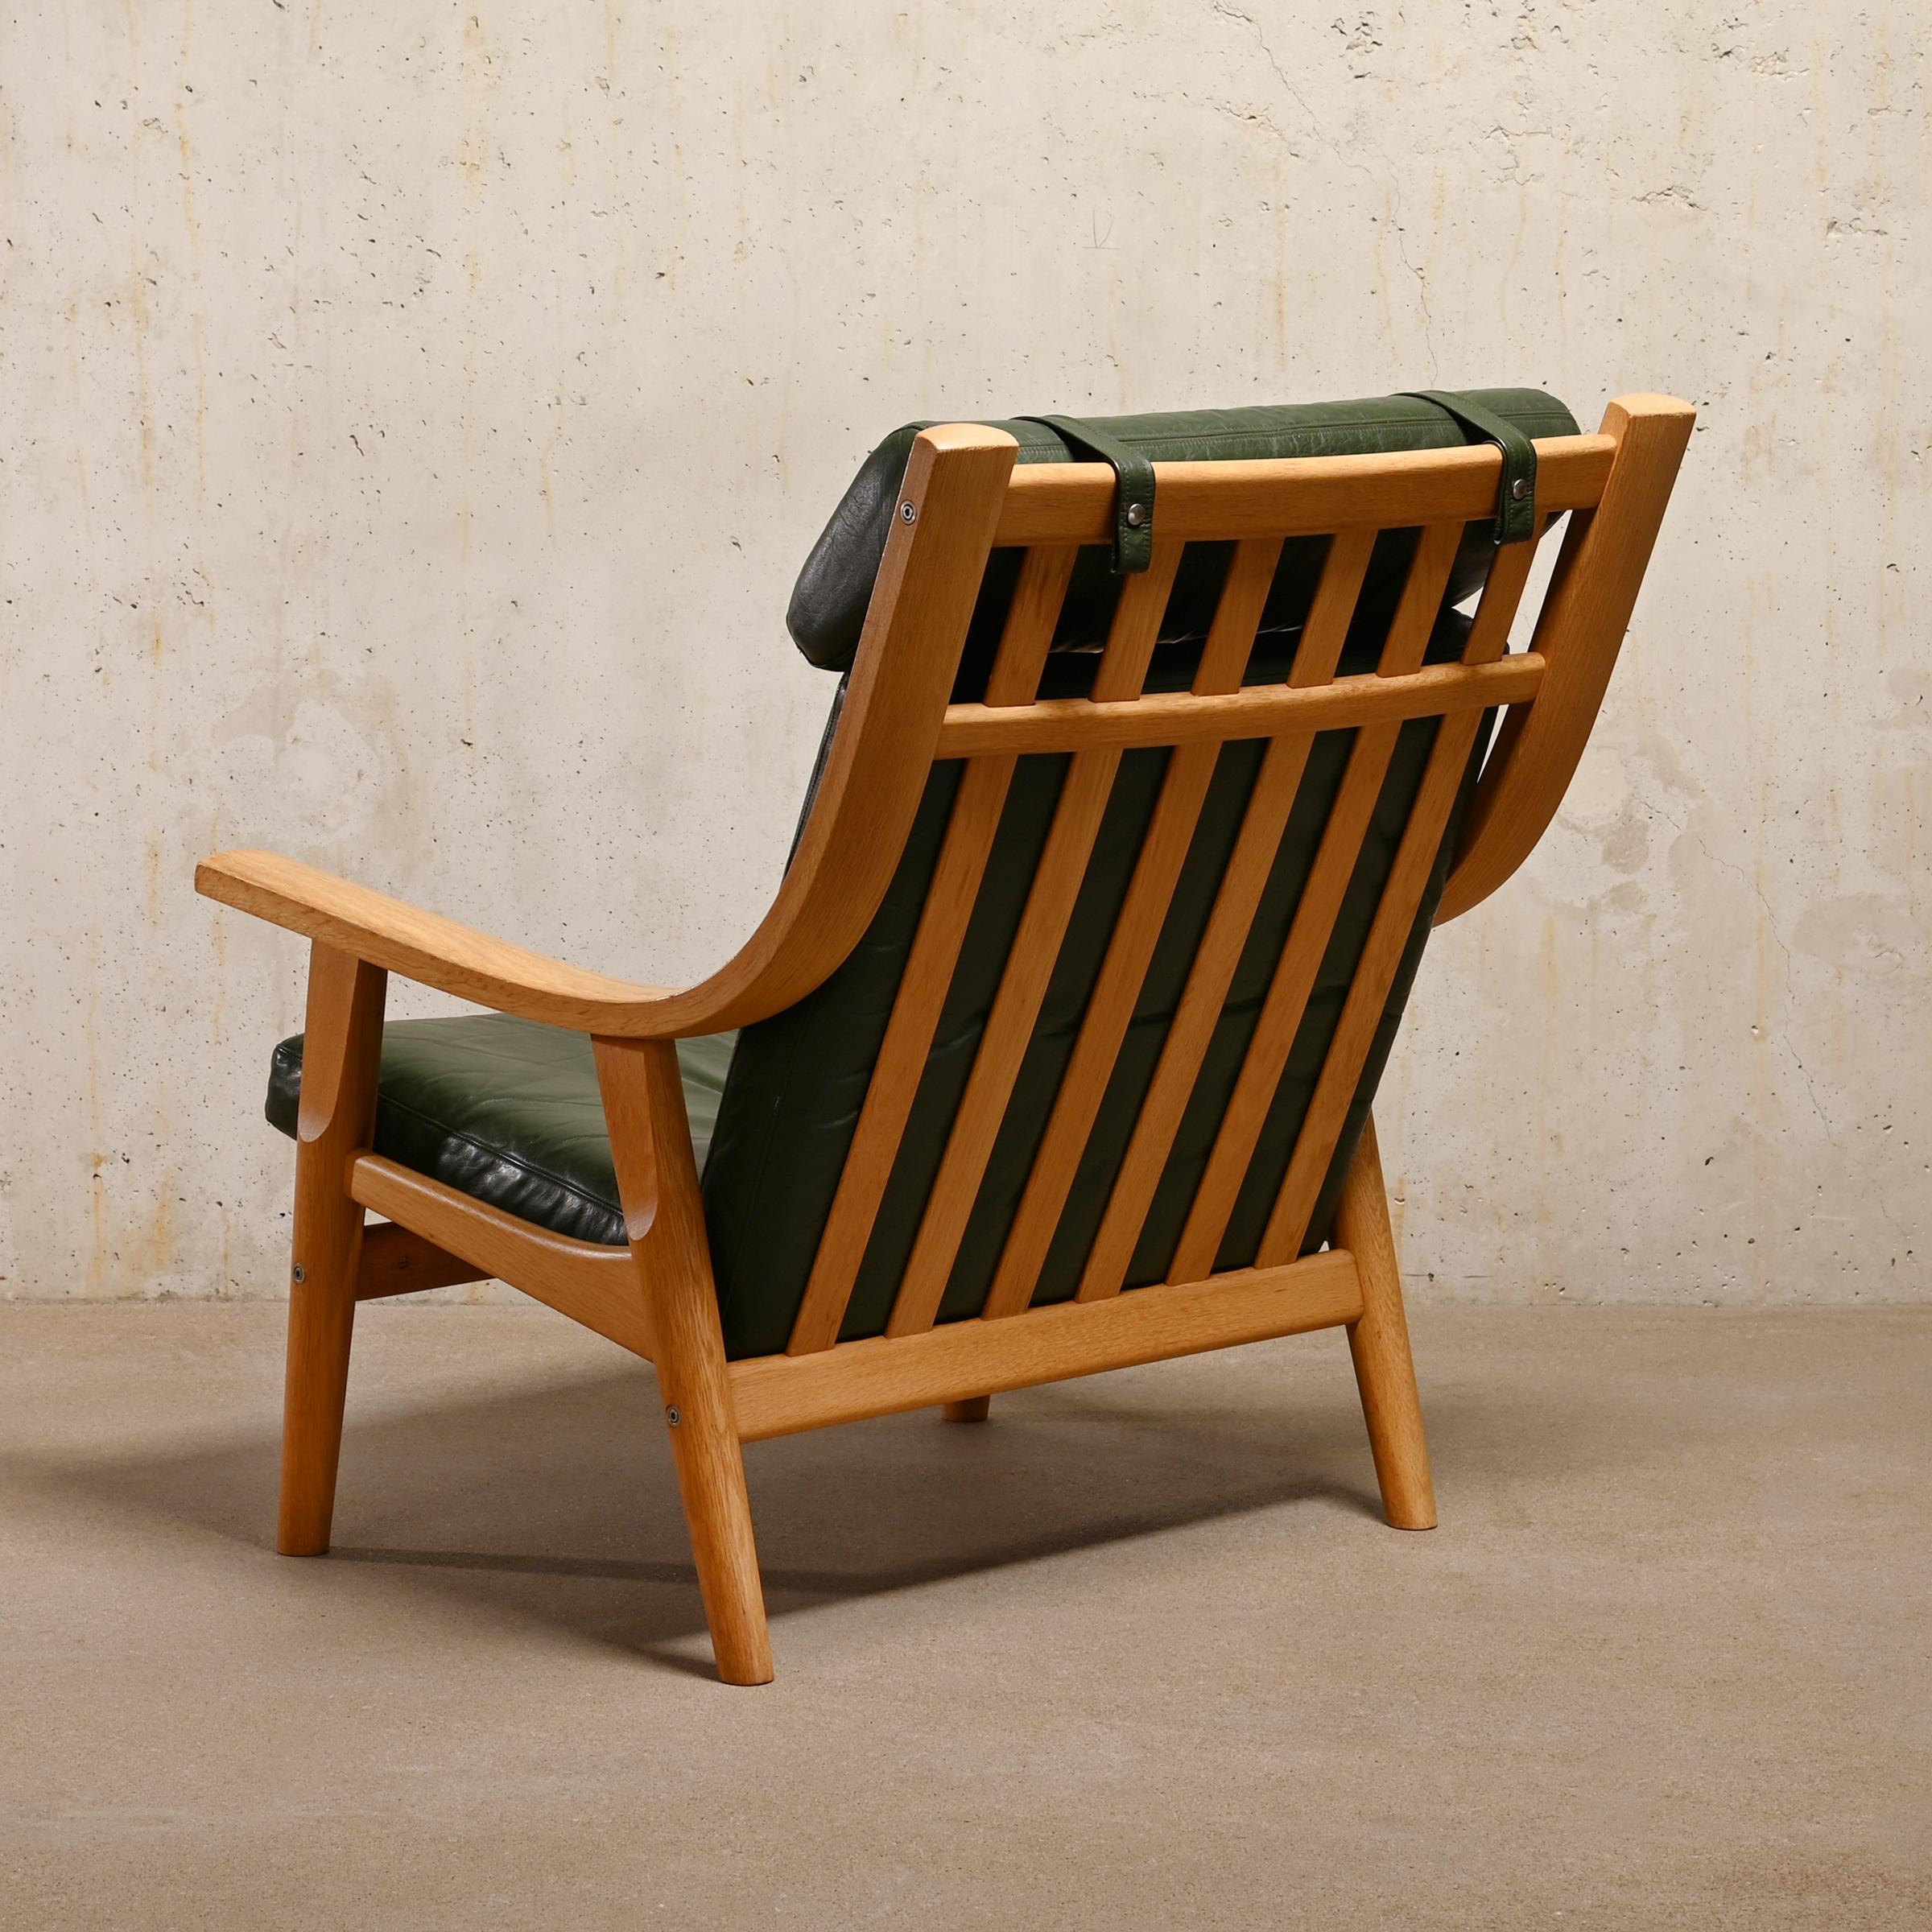 Mid-20th Century Hans J. Wegner GE530 Lounge Chair and Ottoman in Oak and Green Leather, GETAMA